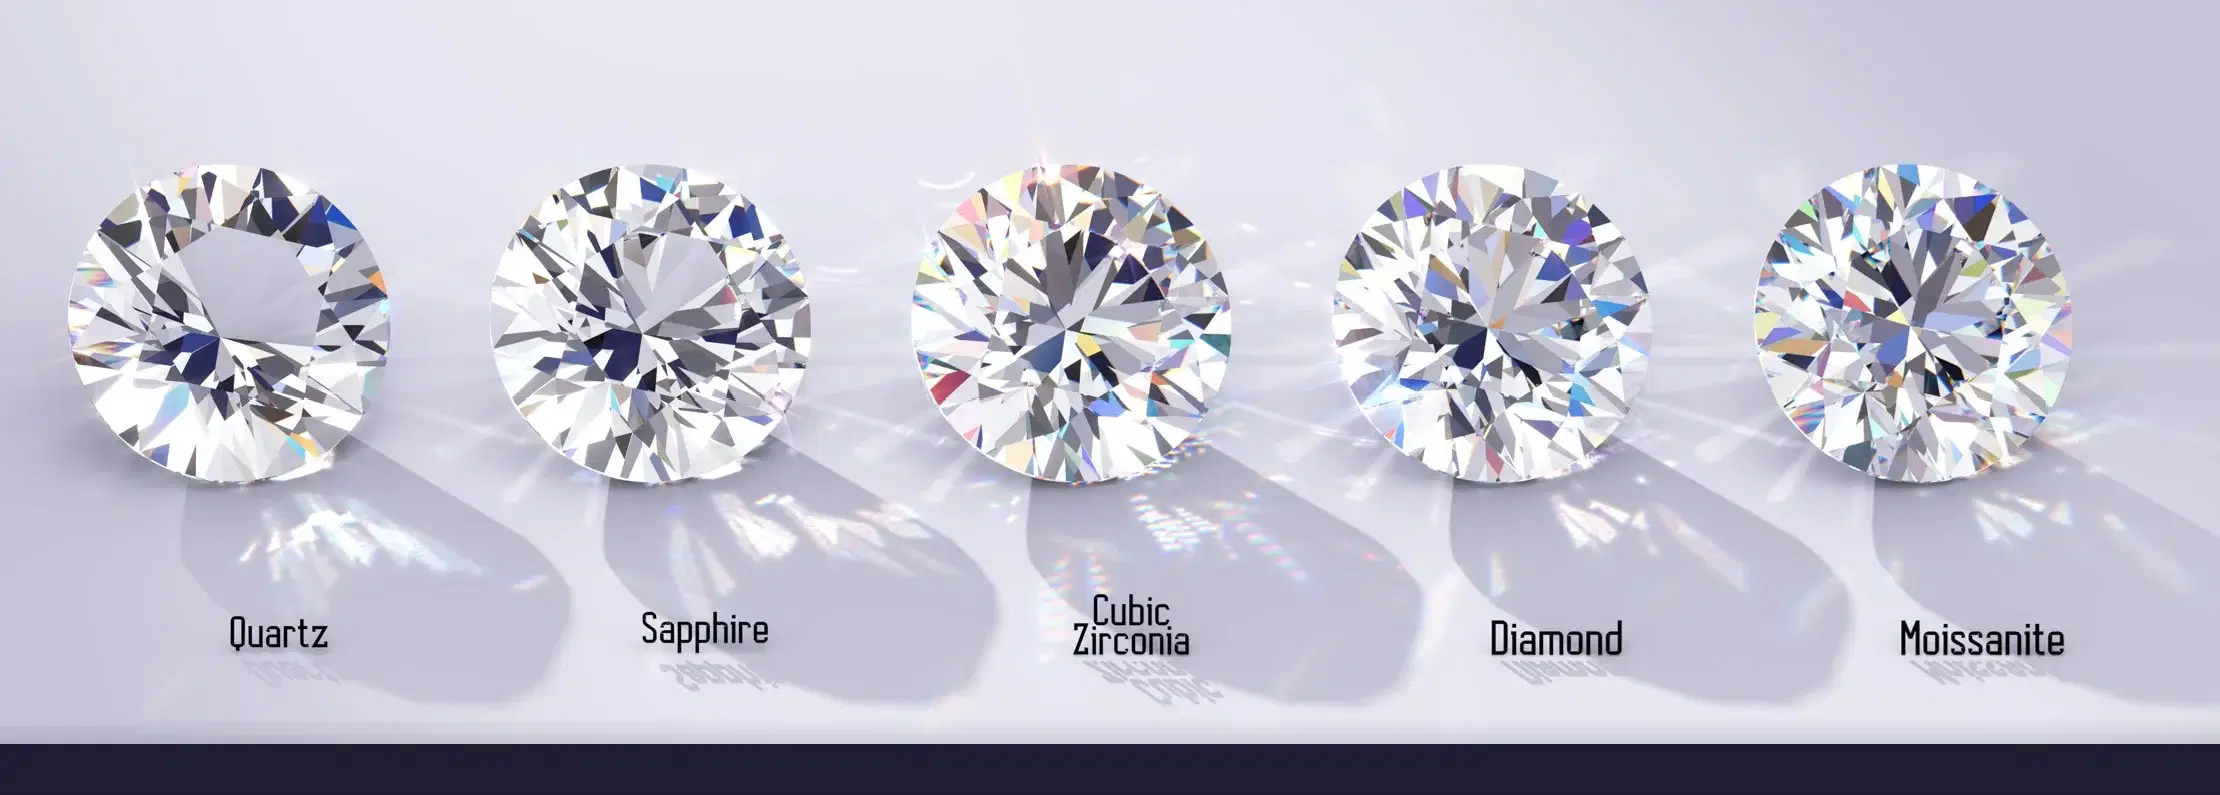 Cubic Zirconia (Synthetic) Gem Guide and Properties Chart